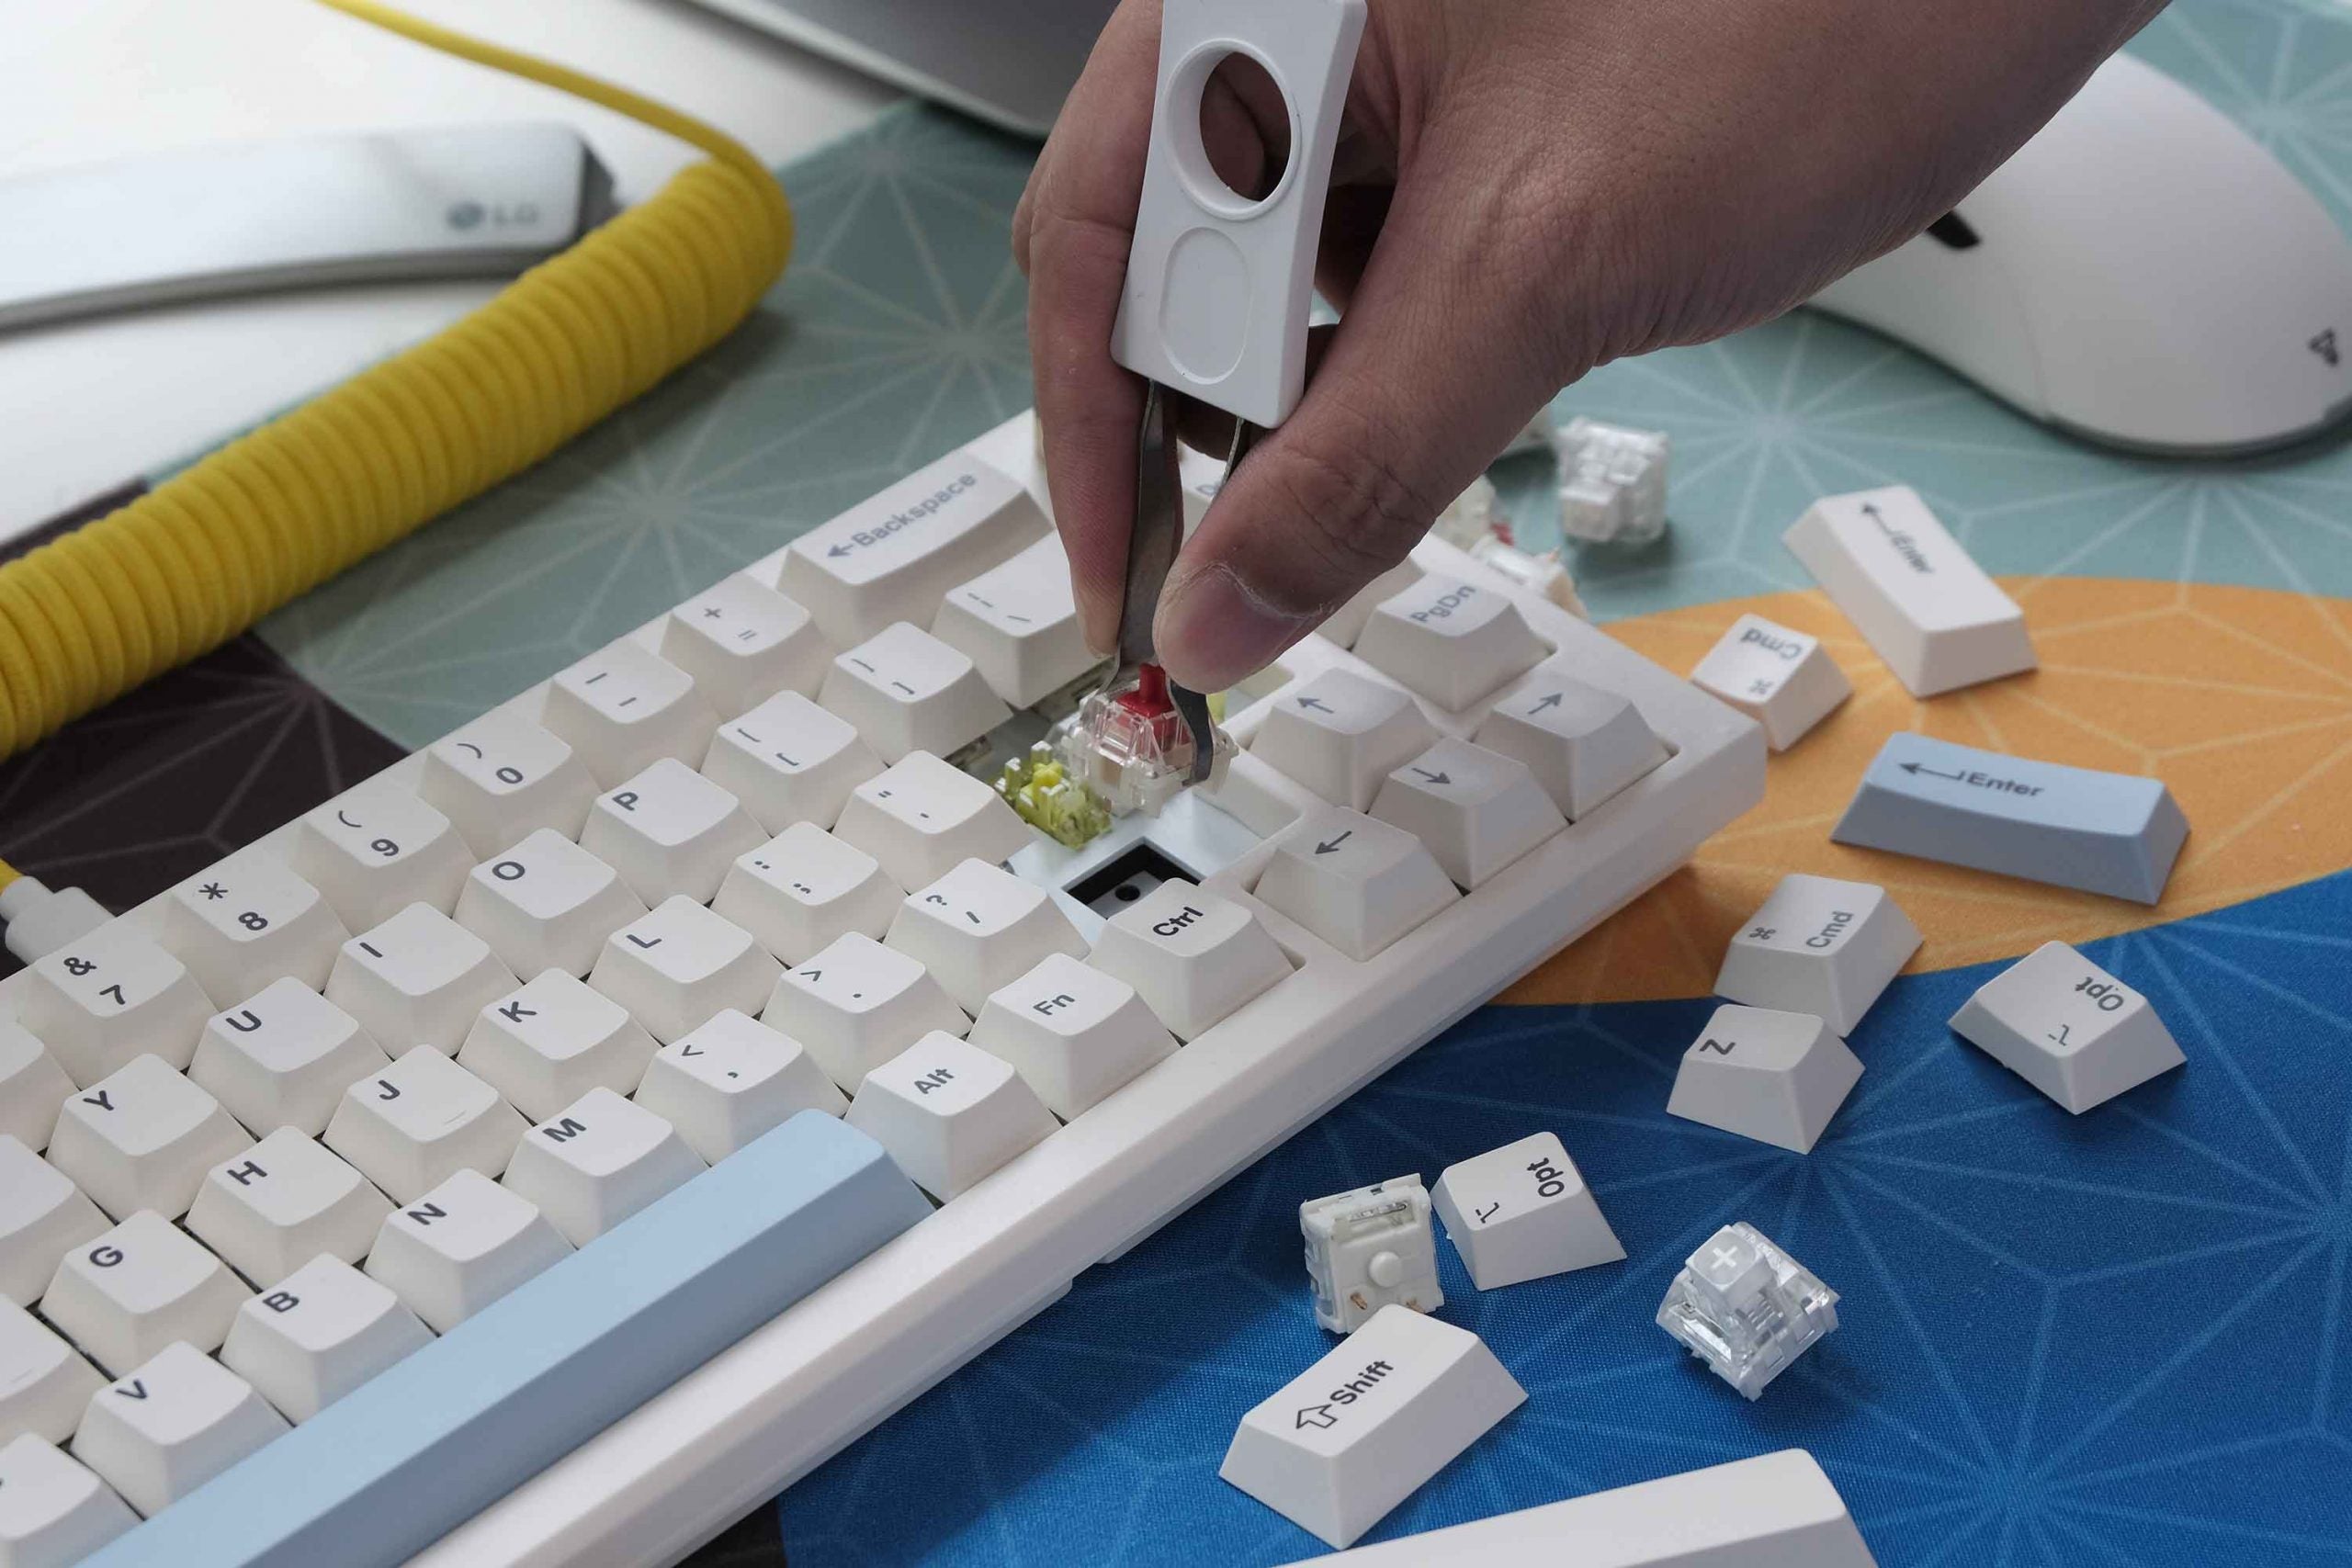 How to Replace Switches On A Hot-Swappable Keyboard